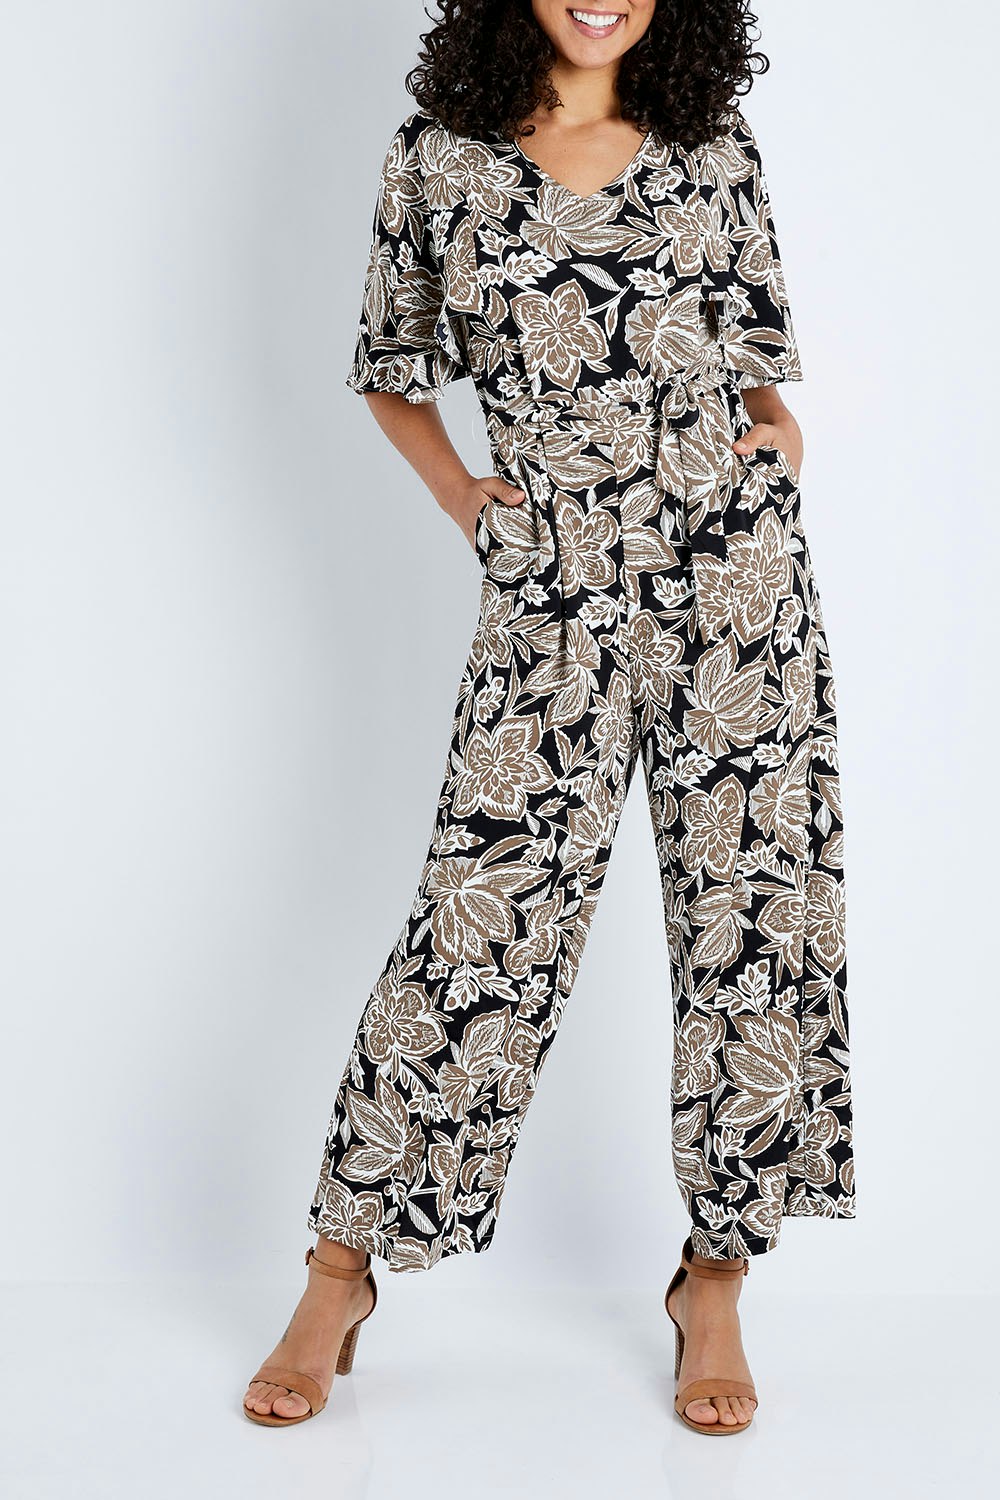 bird by design The Printed Butterfly Sleeve Jumpsuit - Womens Jumpsuits ...